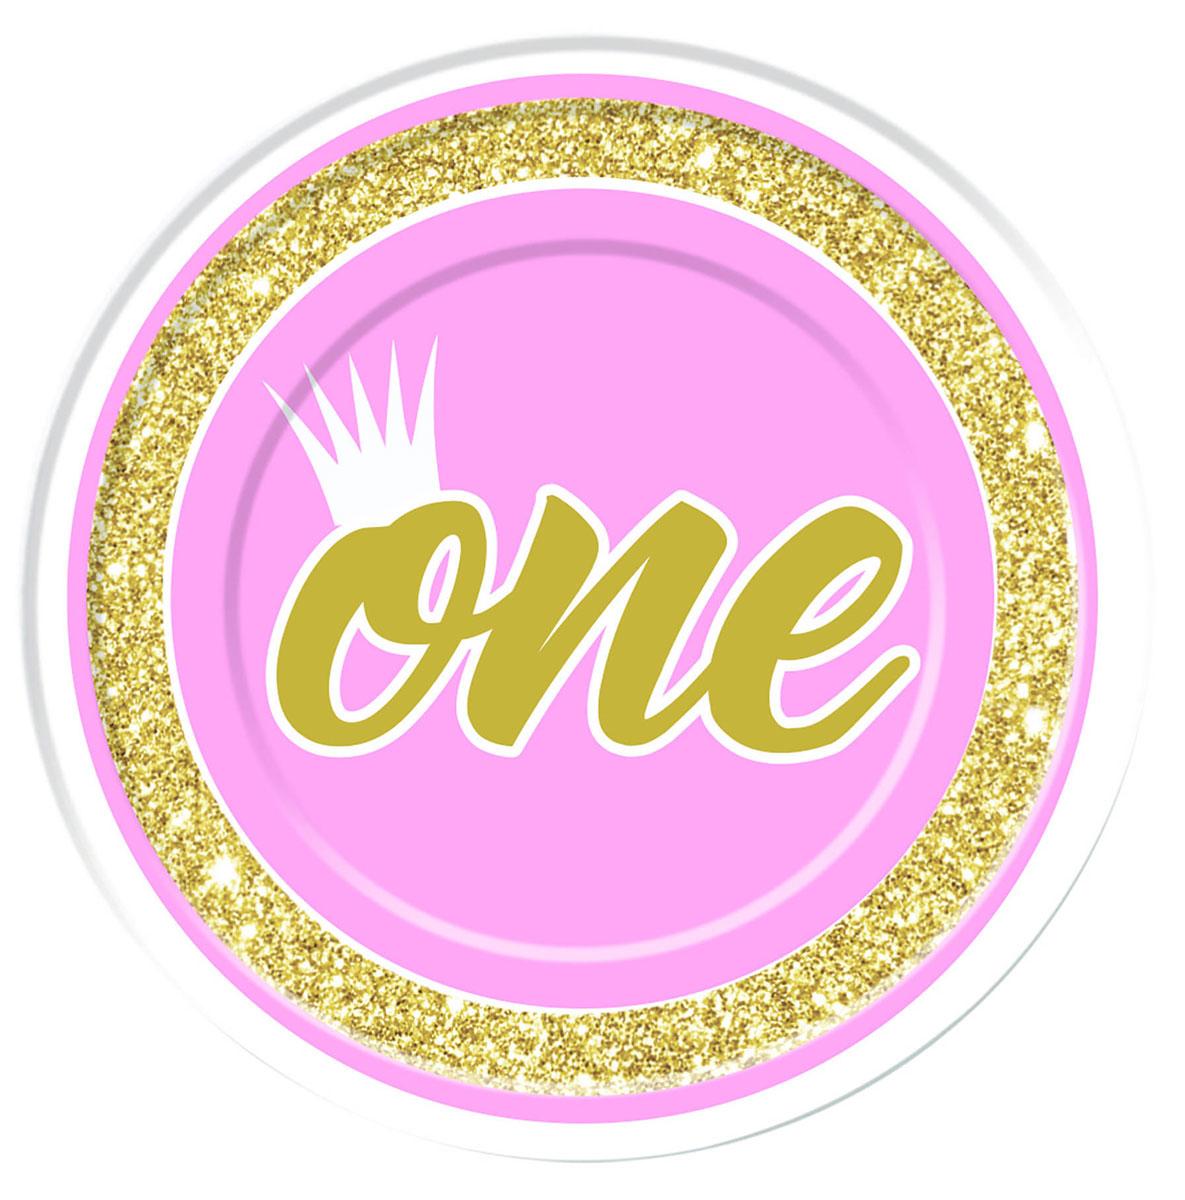 Baby's 1st Birthday 22cm (9") paper plates in pink with gold sparkle, by Forum Novelties 79813 available here at Karnival Costumes online party shop